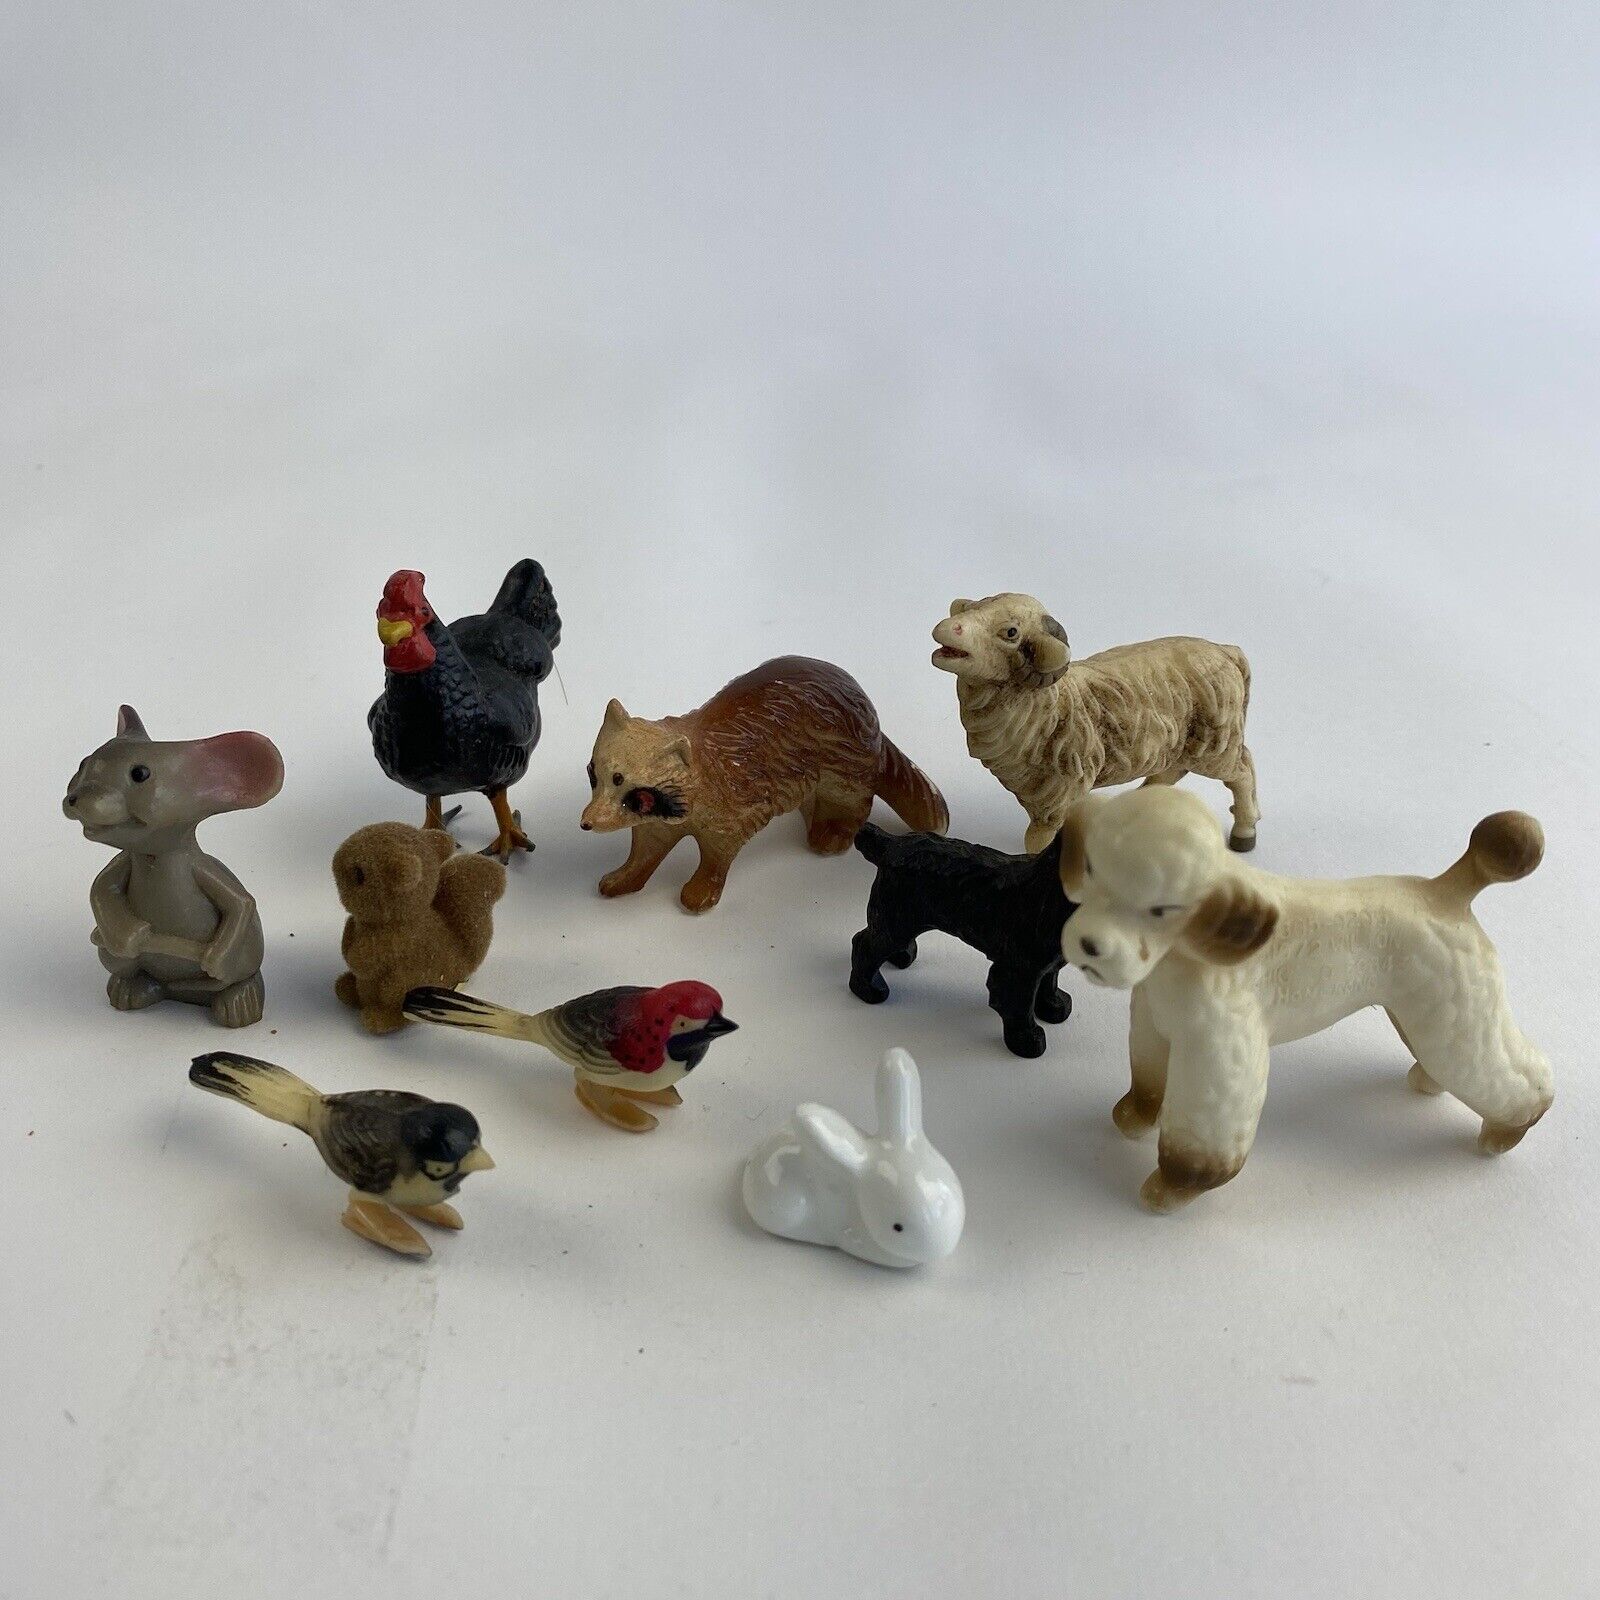 VINTAGE Lot of 10 Miniature Animal Figurines Mouse Poodle Raccoon Birds Chicken